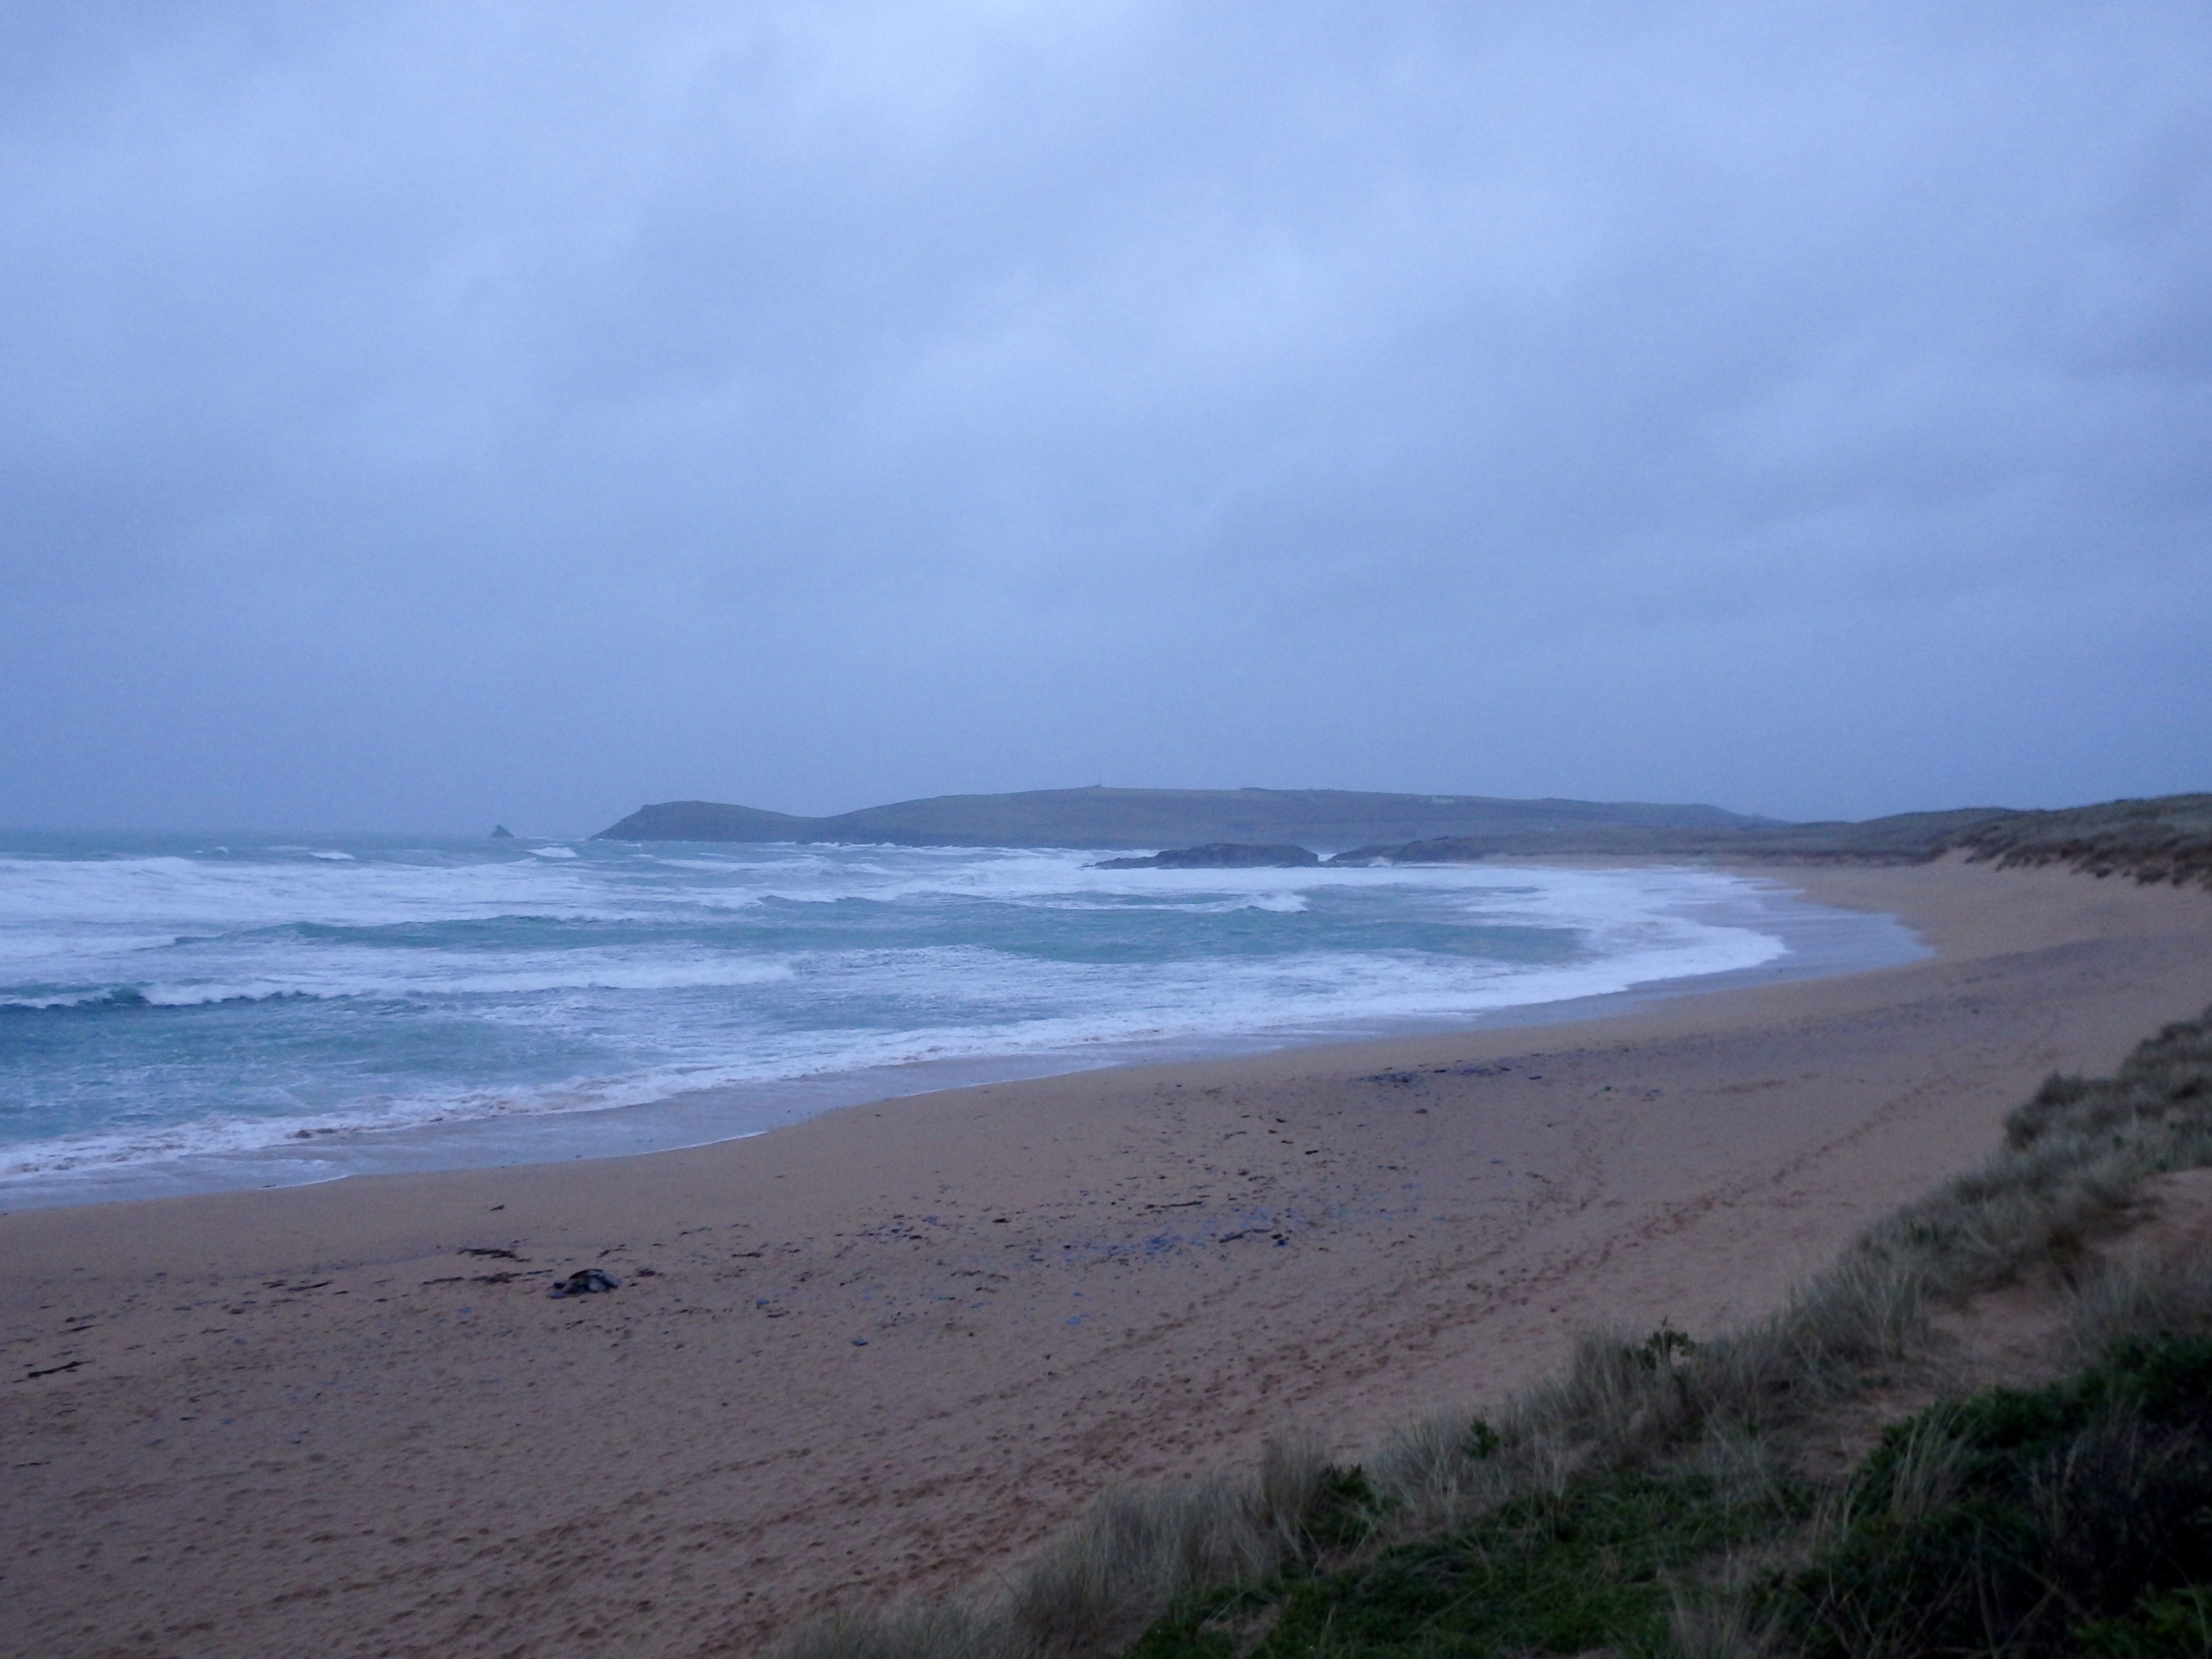 Surf Report for Tuesday 26th January 2016